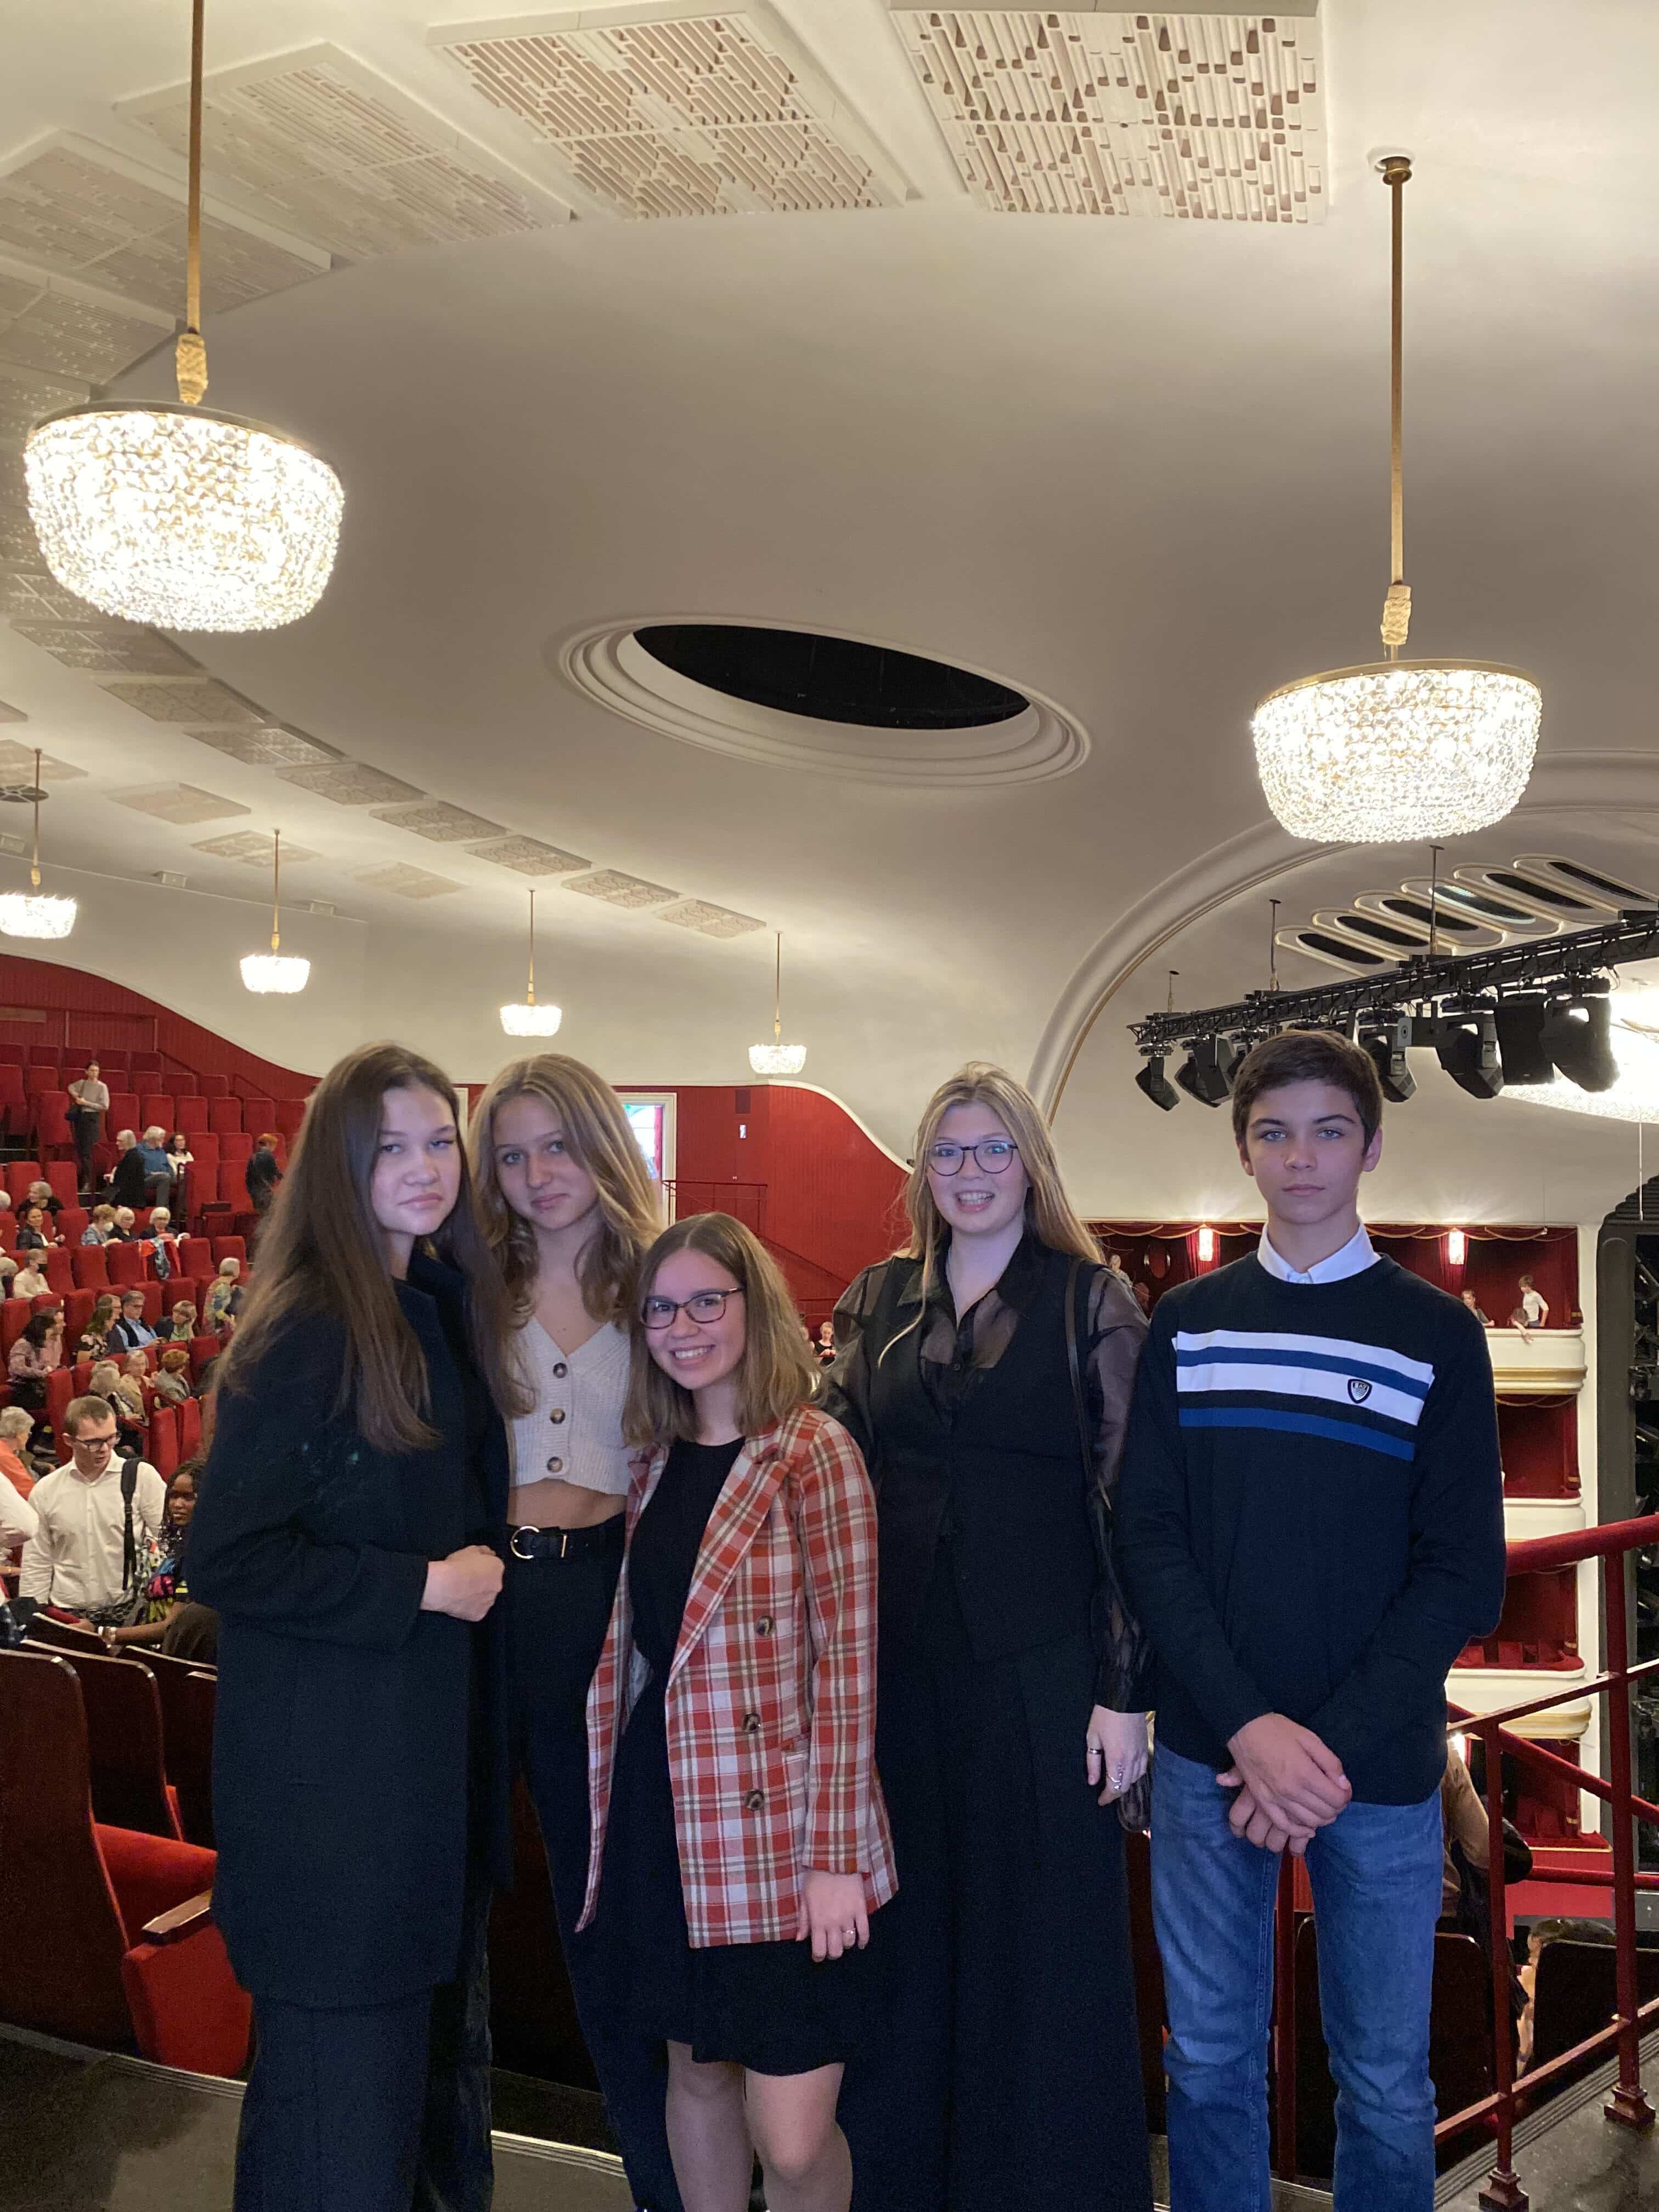 SKIS ATTENDS A BALLET AT VOLKSOPER